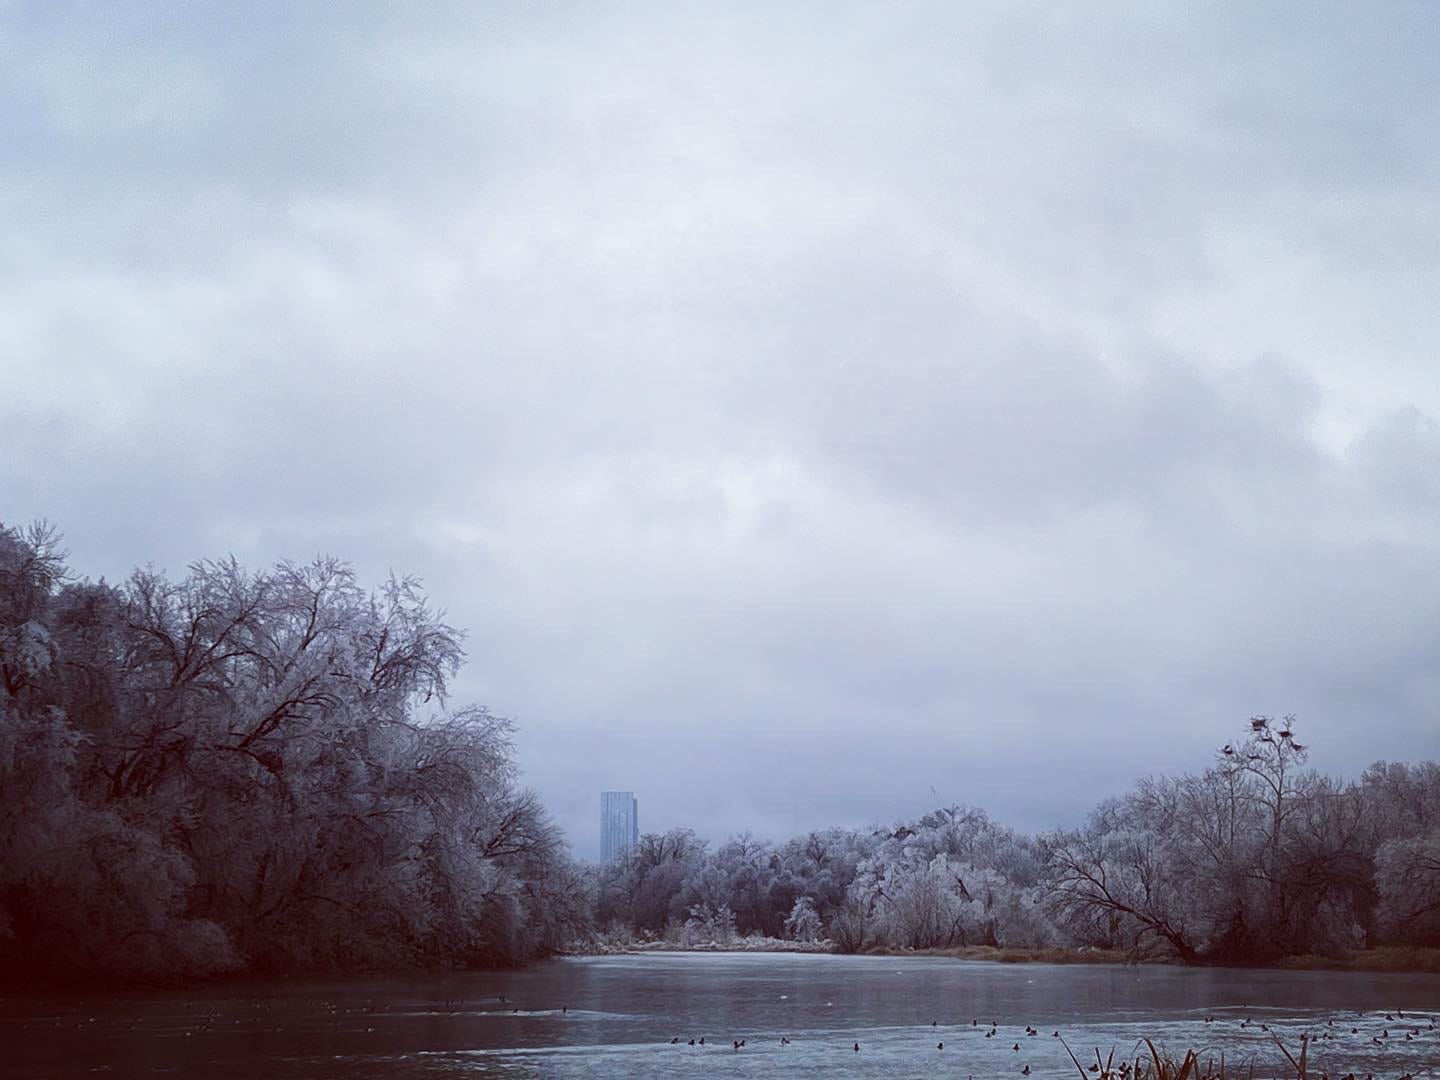 Picture of Colorado River with ice encrusted trees, herons in the rookery, and a high rise in the background